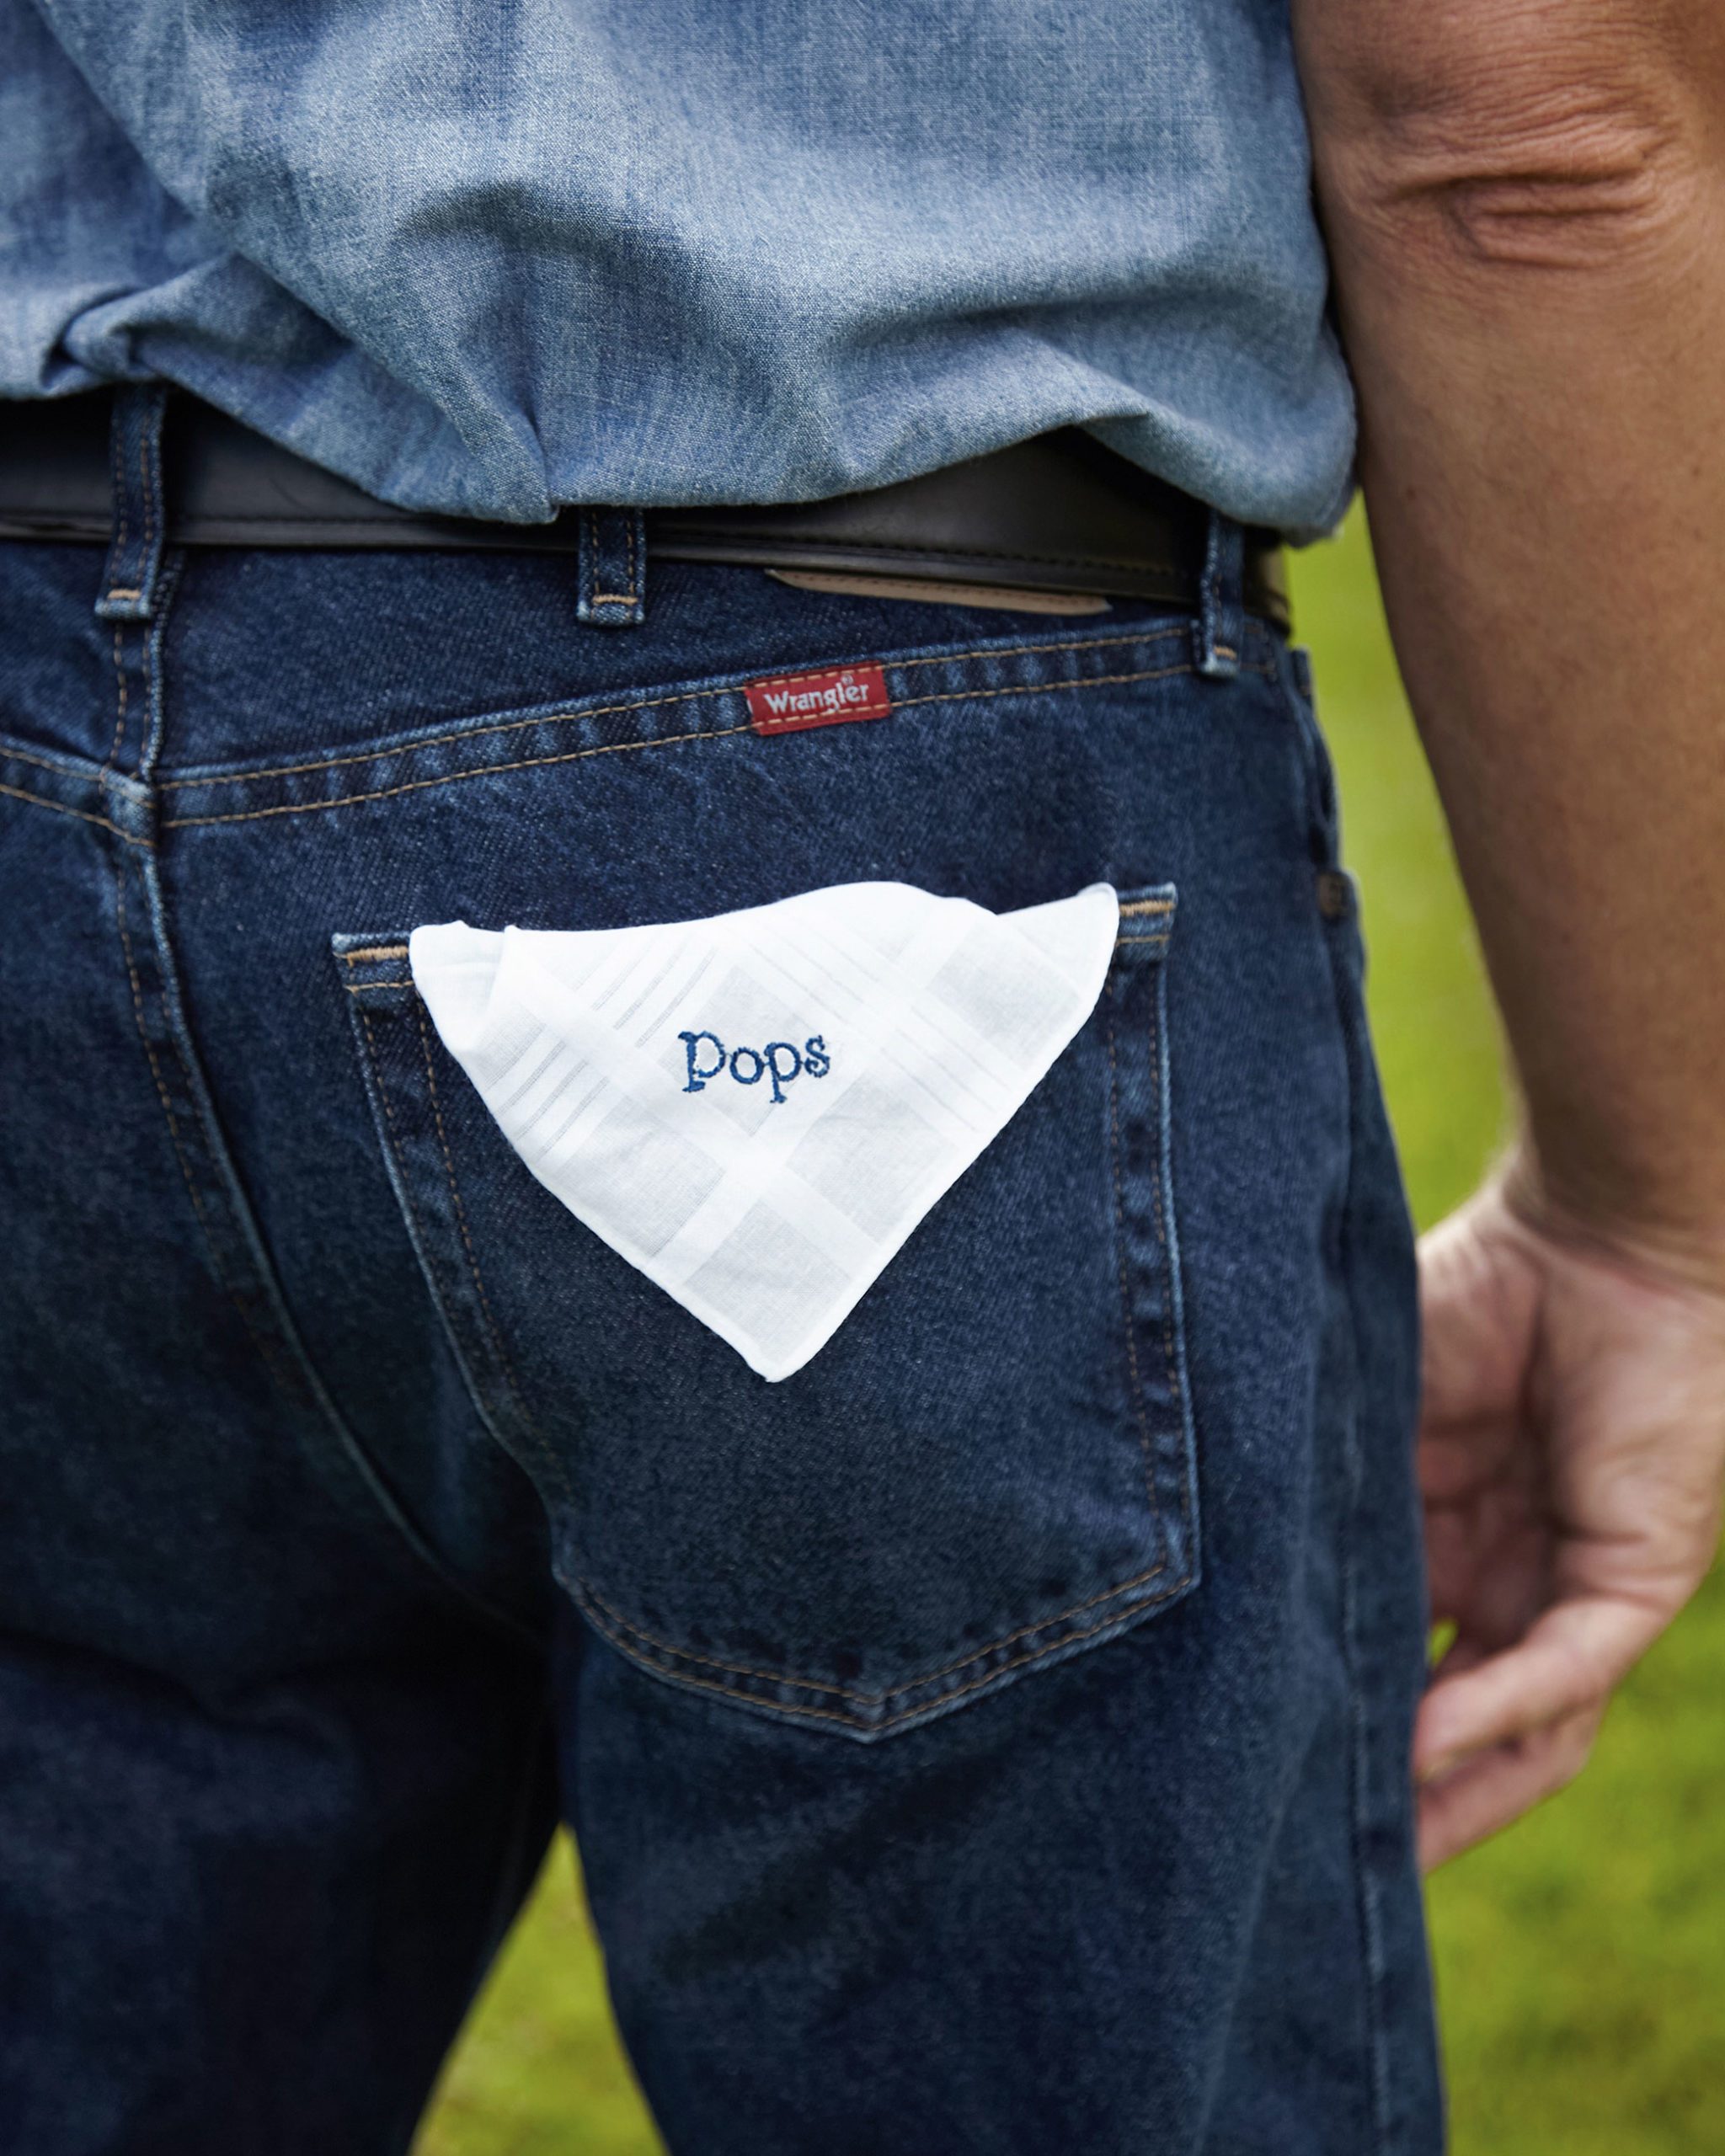 man's rear pocket with hankercheif sticking out